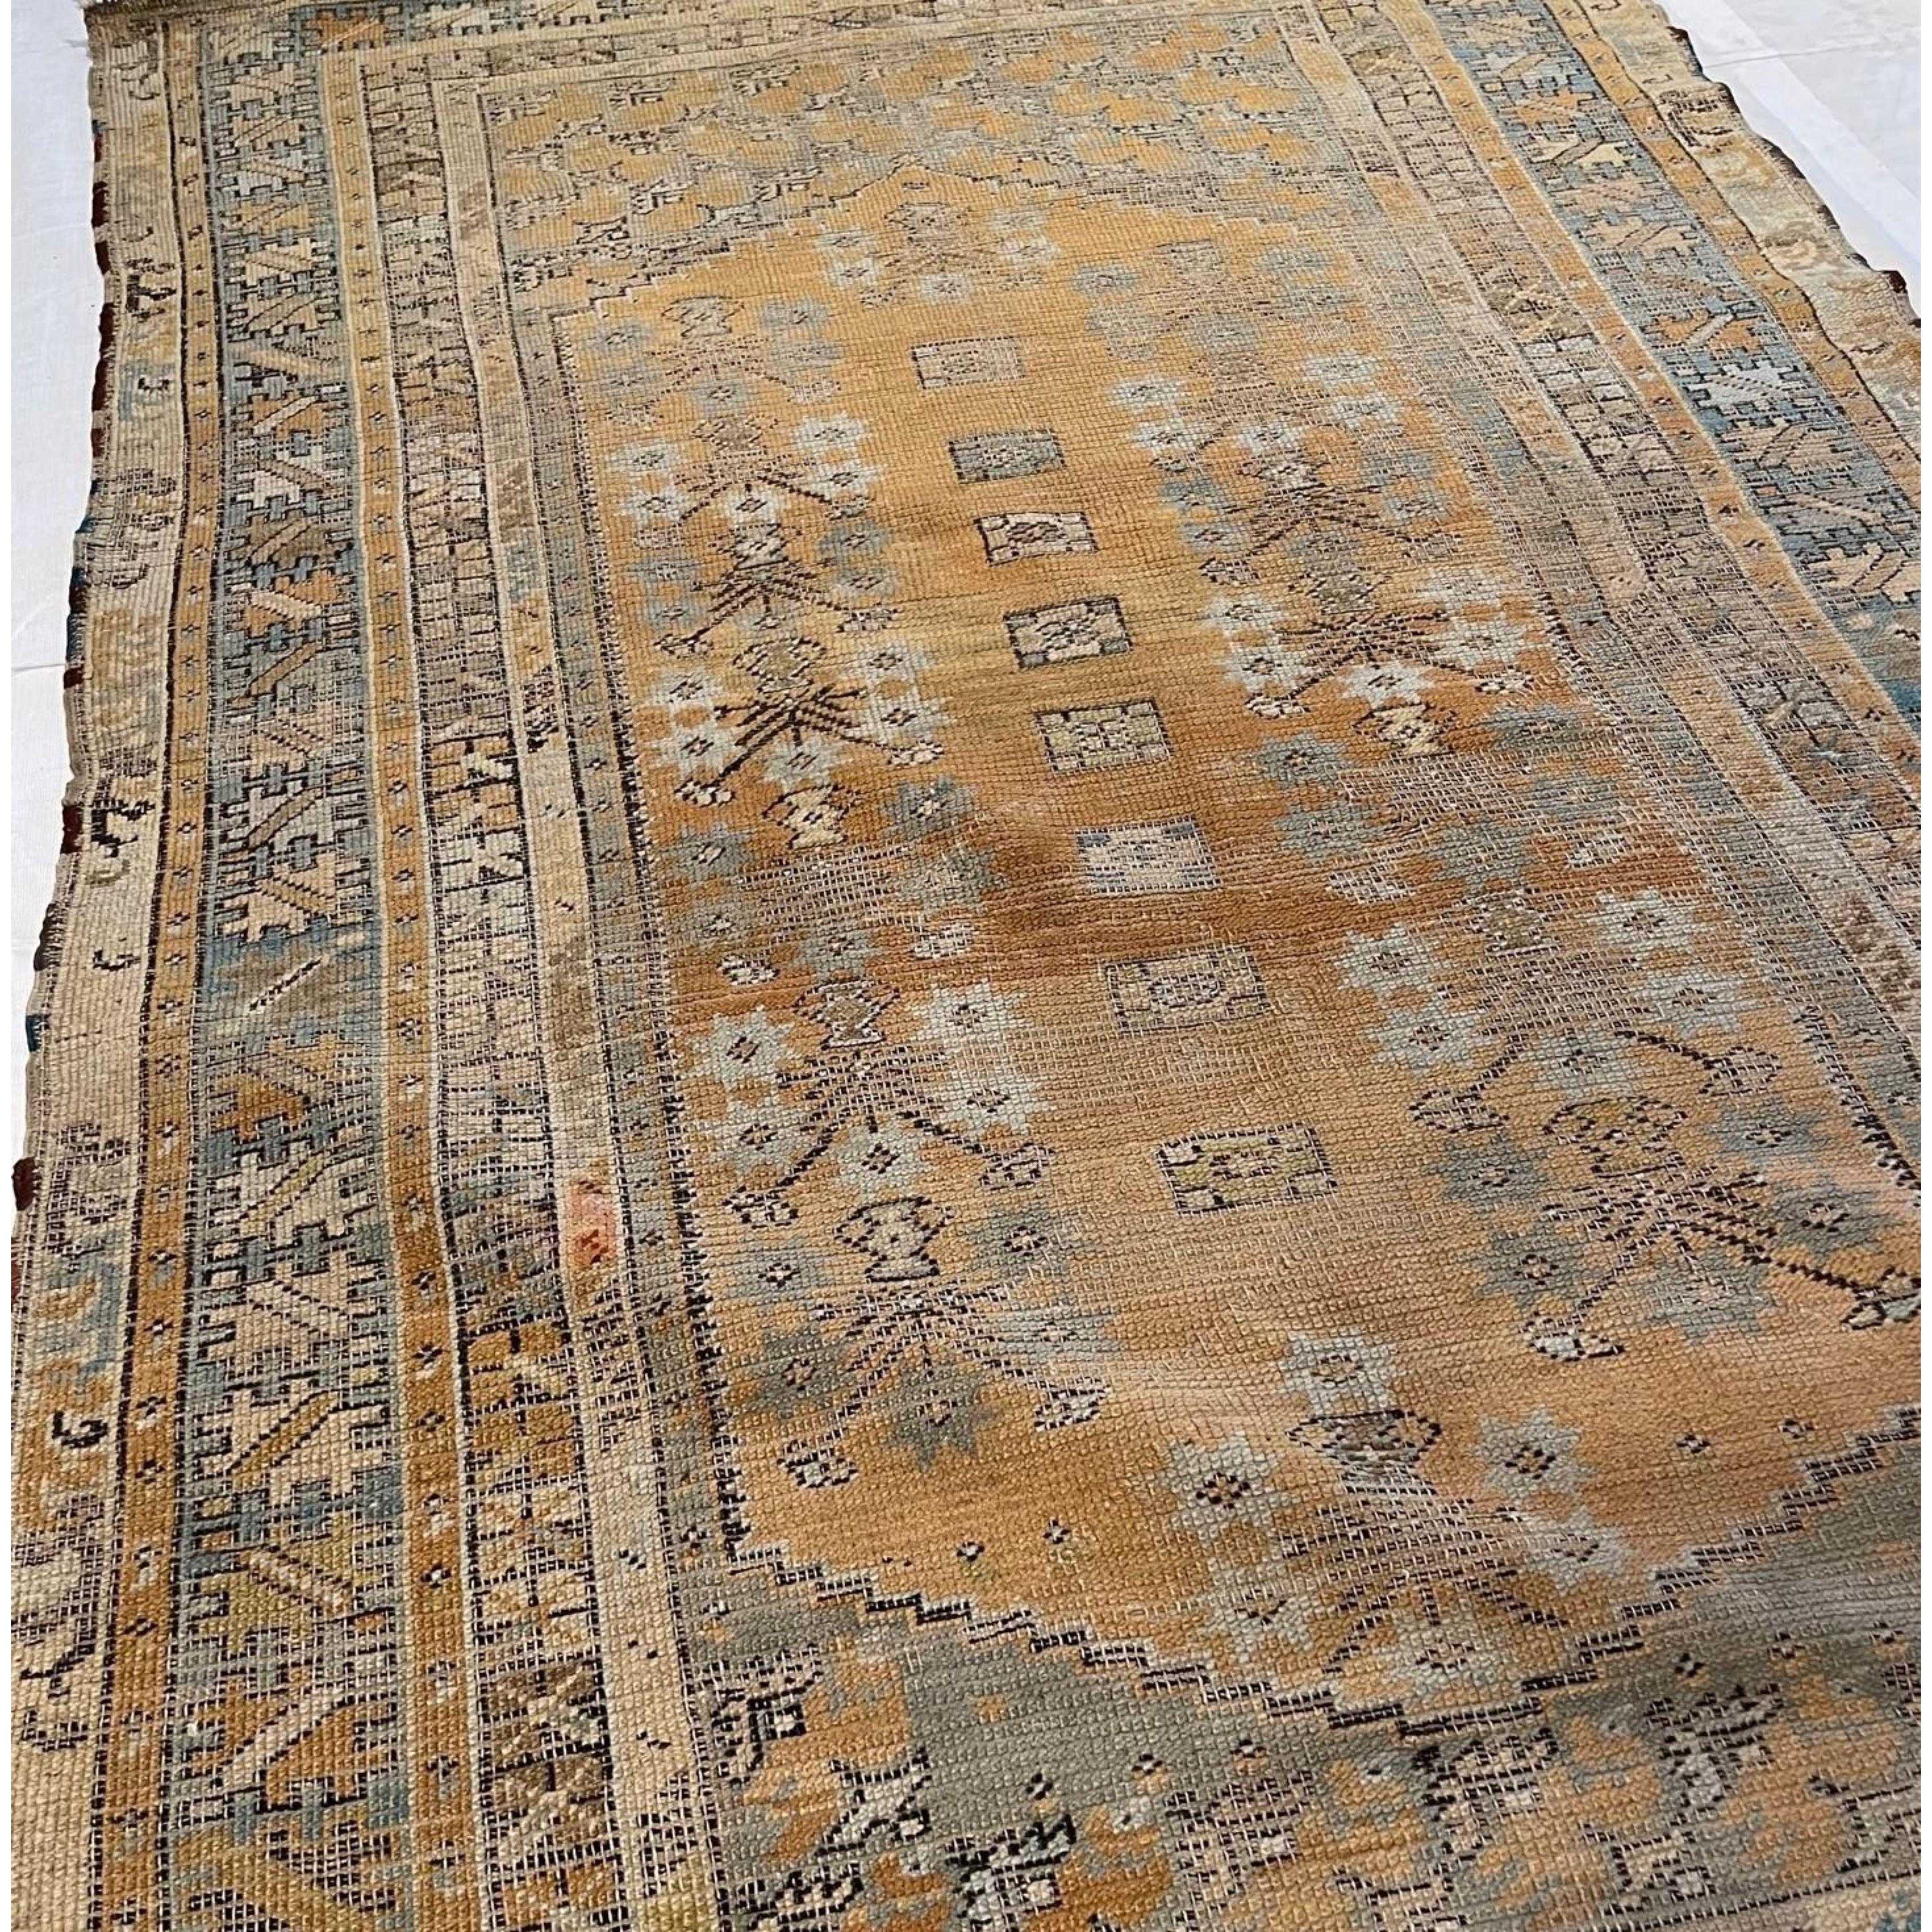 Antique Indian Rugs – Not all the rugs that were woven in India are easy to categorize. That is why we created this antique Indian rugs section. Here you will find Indian rugs of which the origin city isn’t specifically identified. This blanket